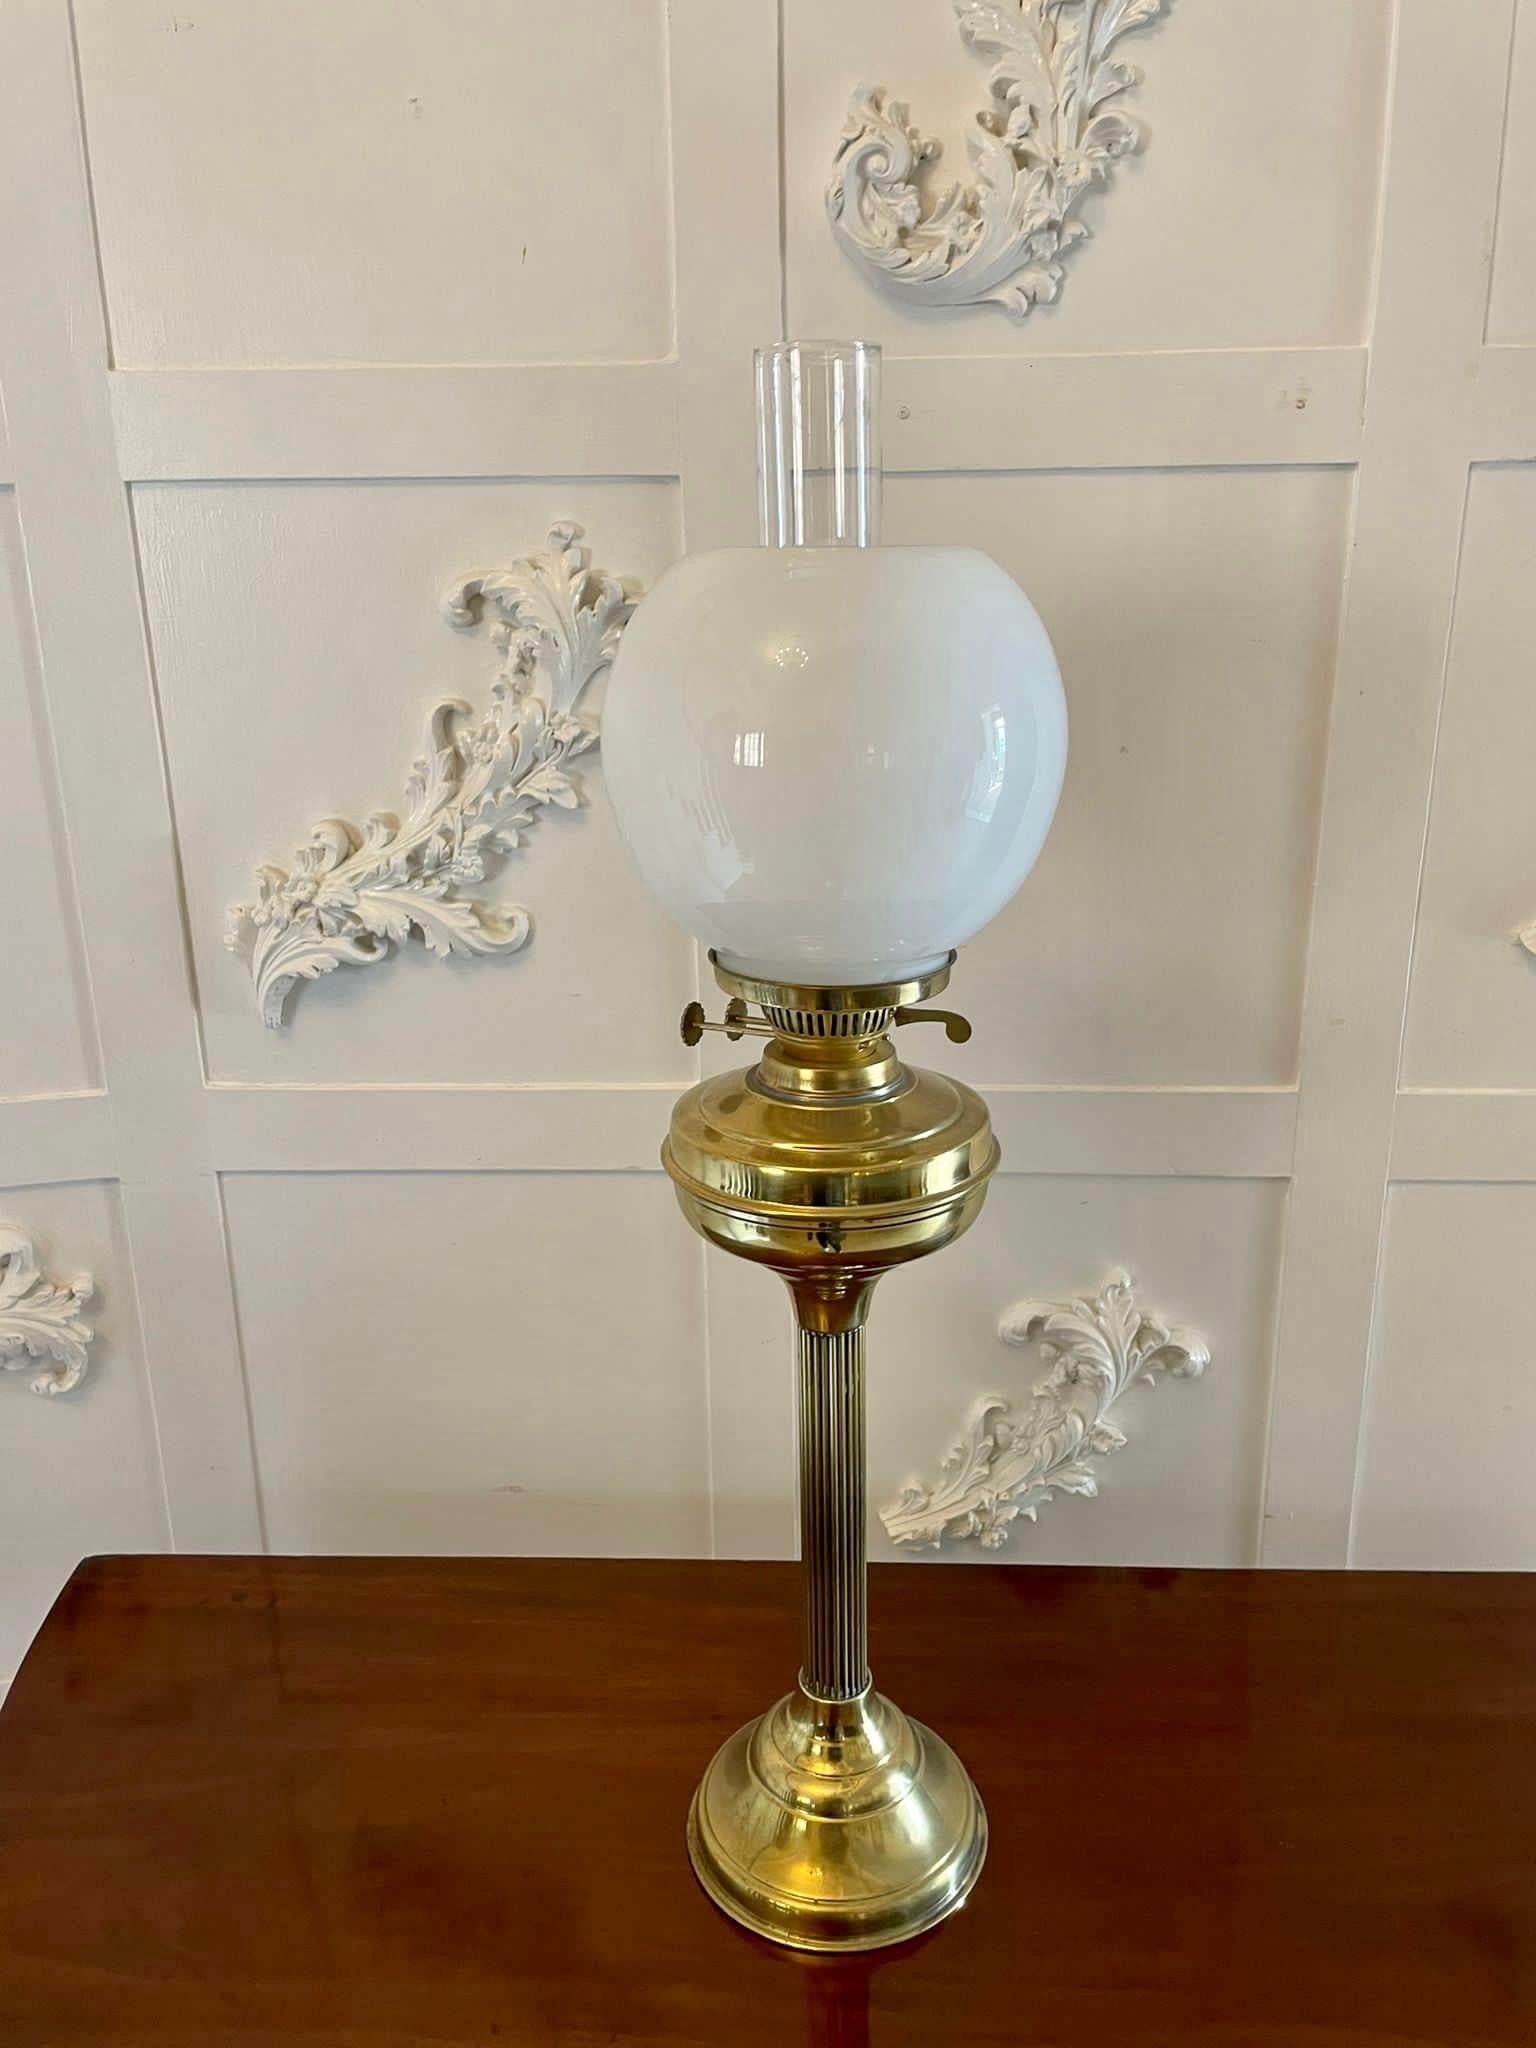 Unusual pair of antique Victorian oil lamps with original glass shades and chimneys, double burner, brass font supported by a reeded column standing on a stepped circular brass base

A wonderfully decorative pair in lovely original